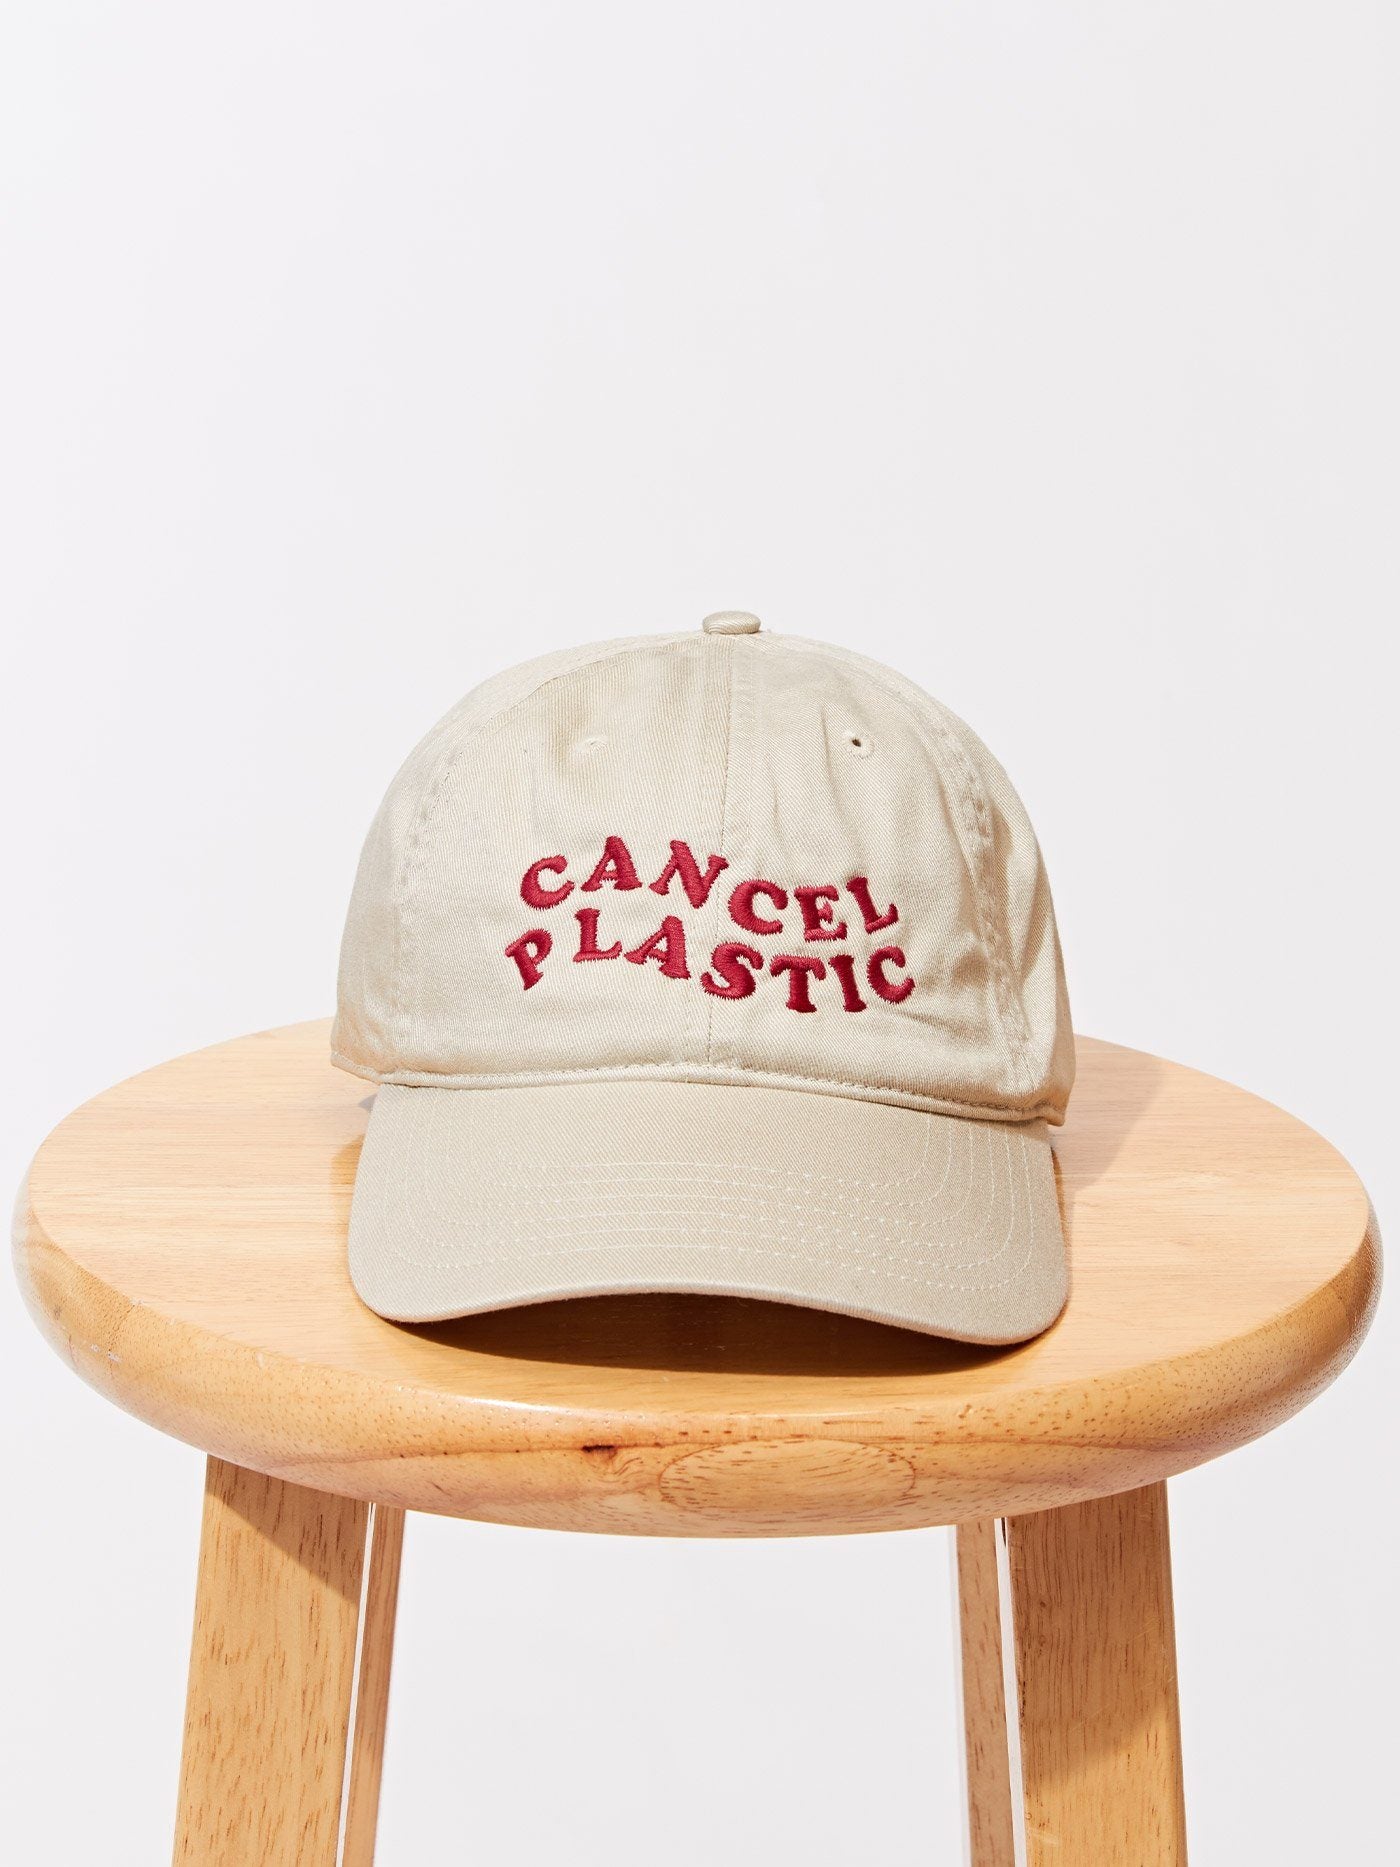 Cancel Plastic Dad Hat Threads 4 Thought 